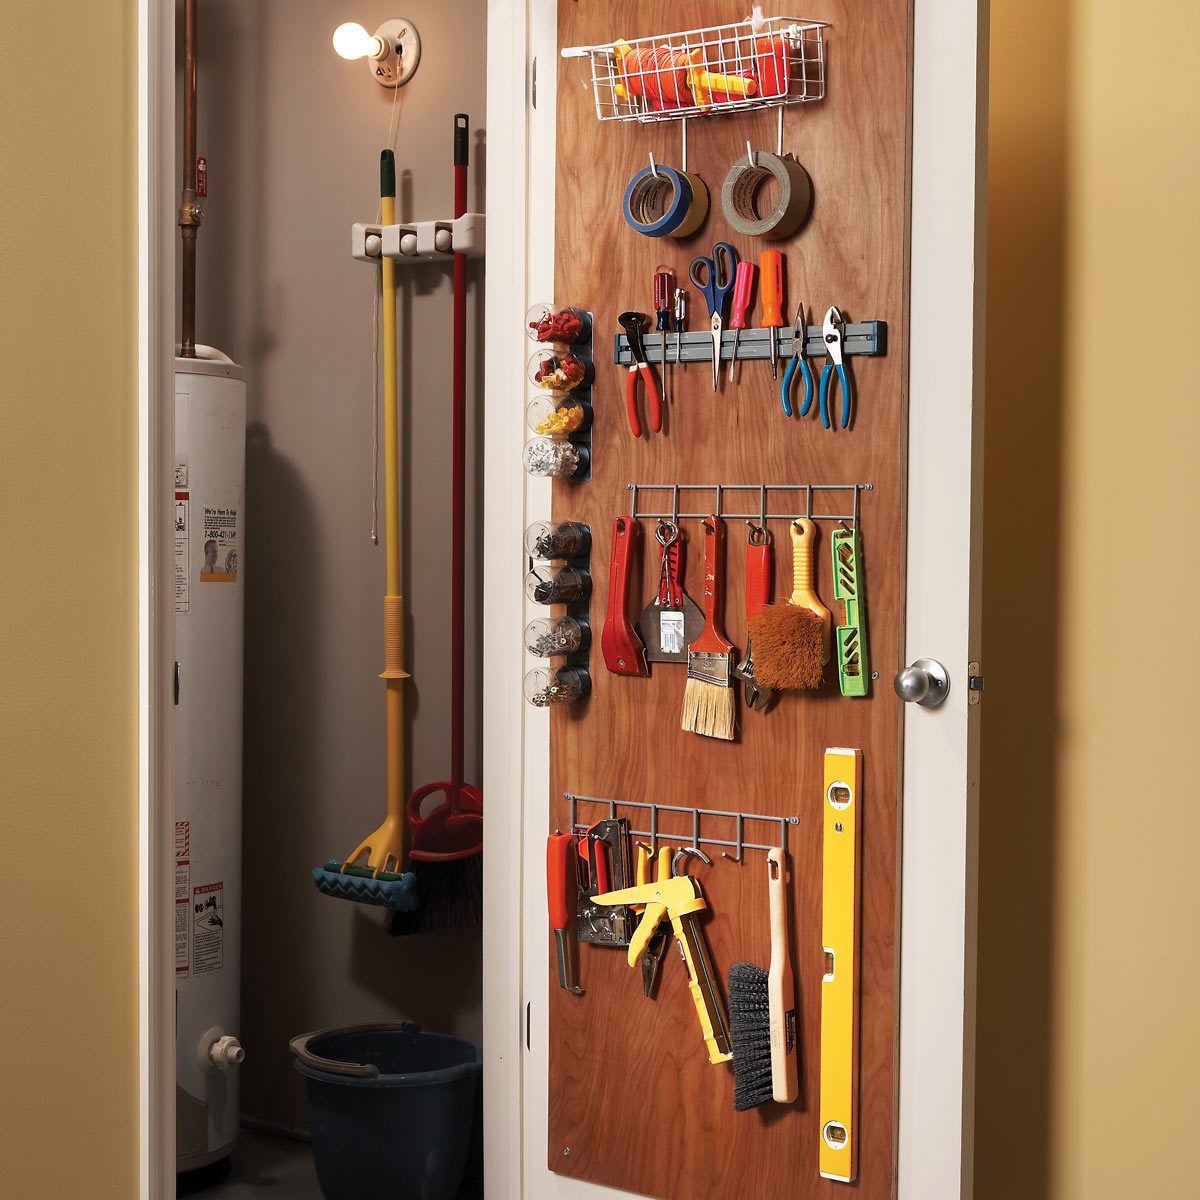 75 Best-Ever Storage Tips for Your Home